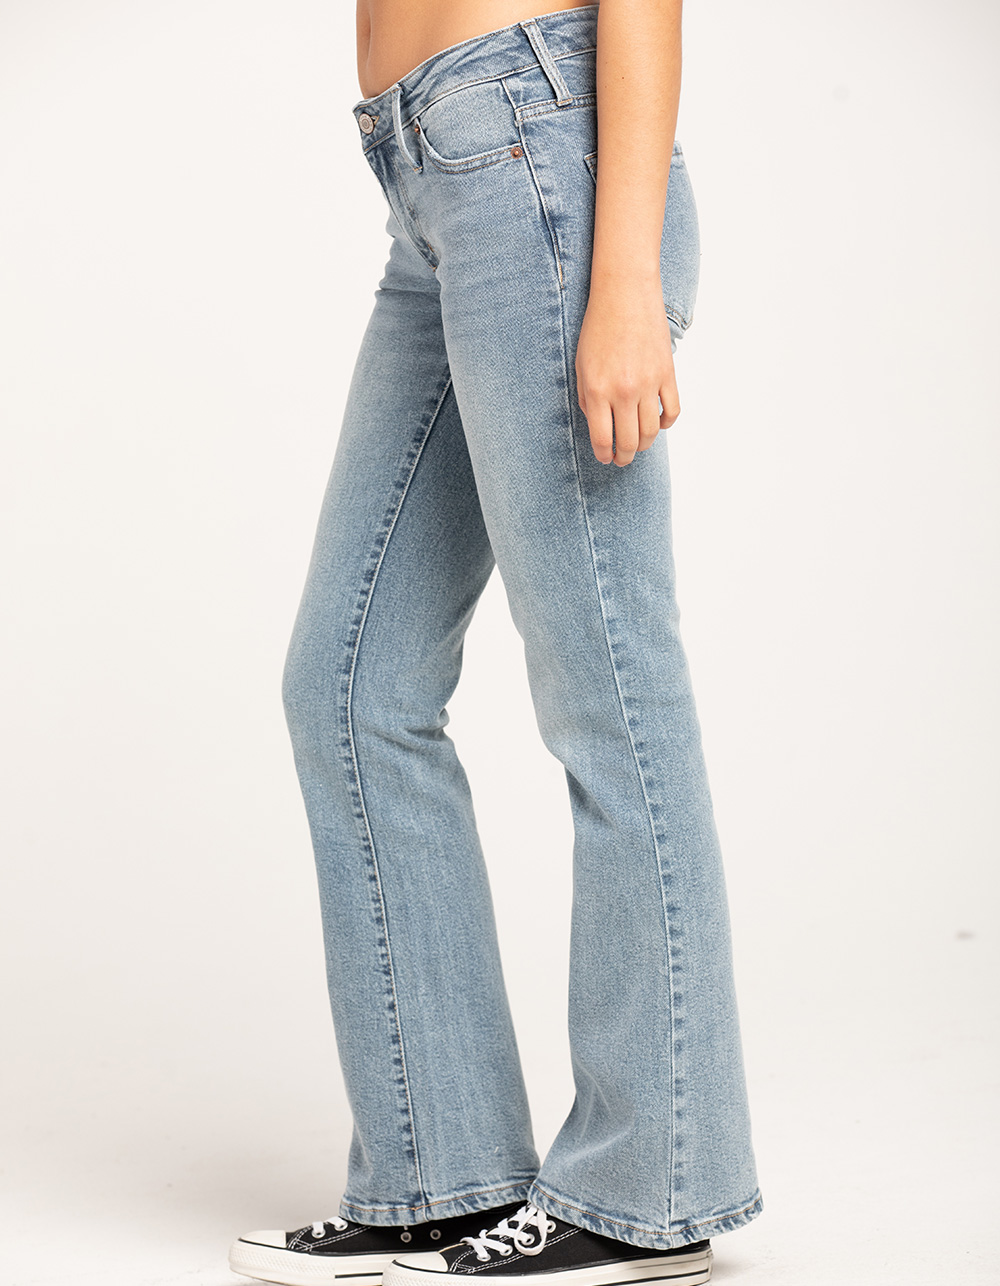 tillys rsq womens high rise flare jeans｜TikTok Search